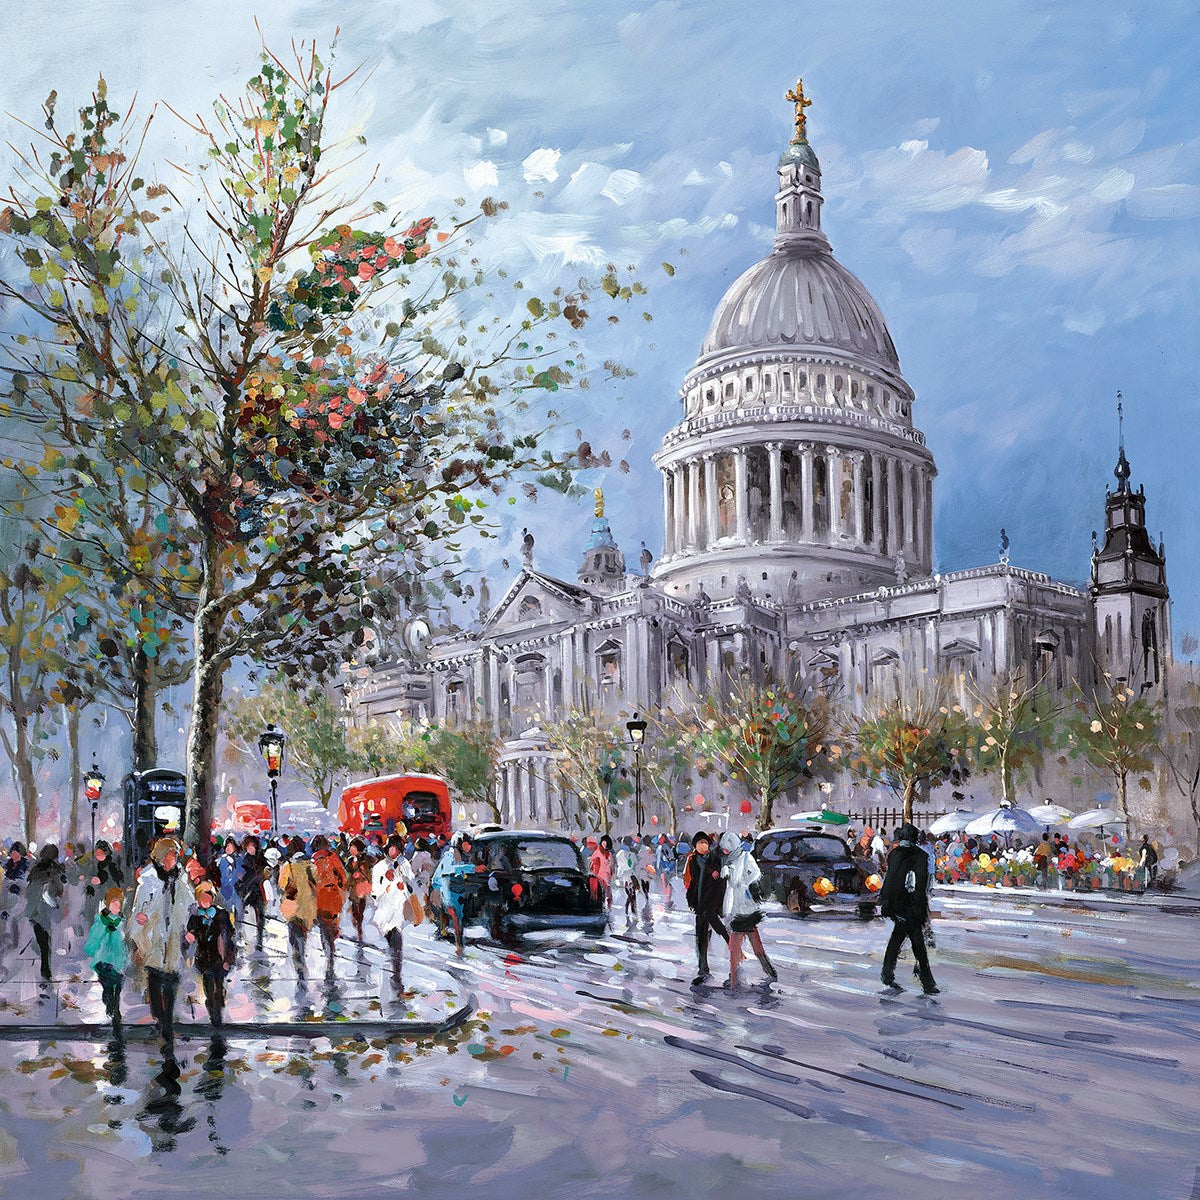 Heading to St Paul's by Henderson Cisz